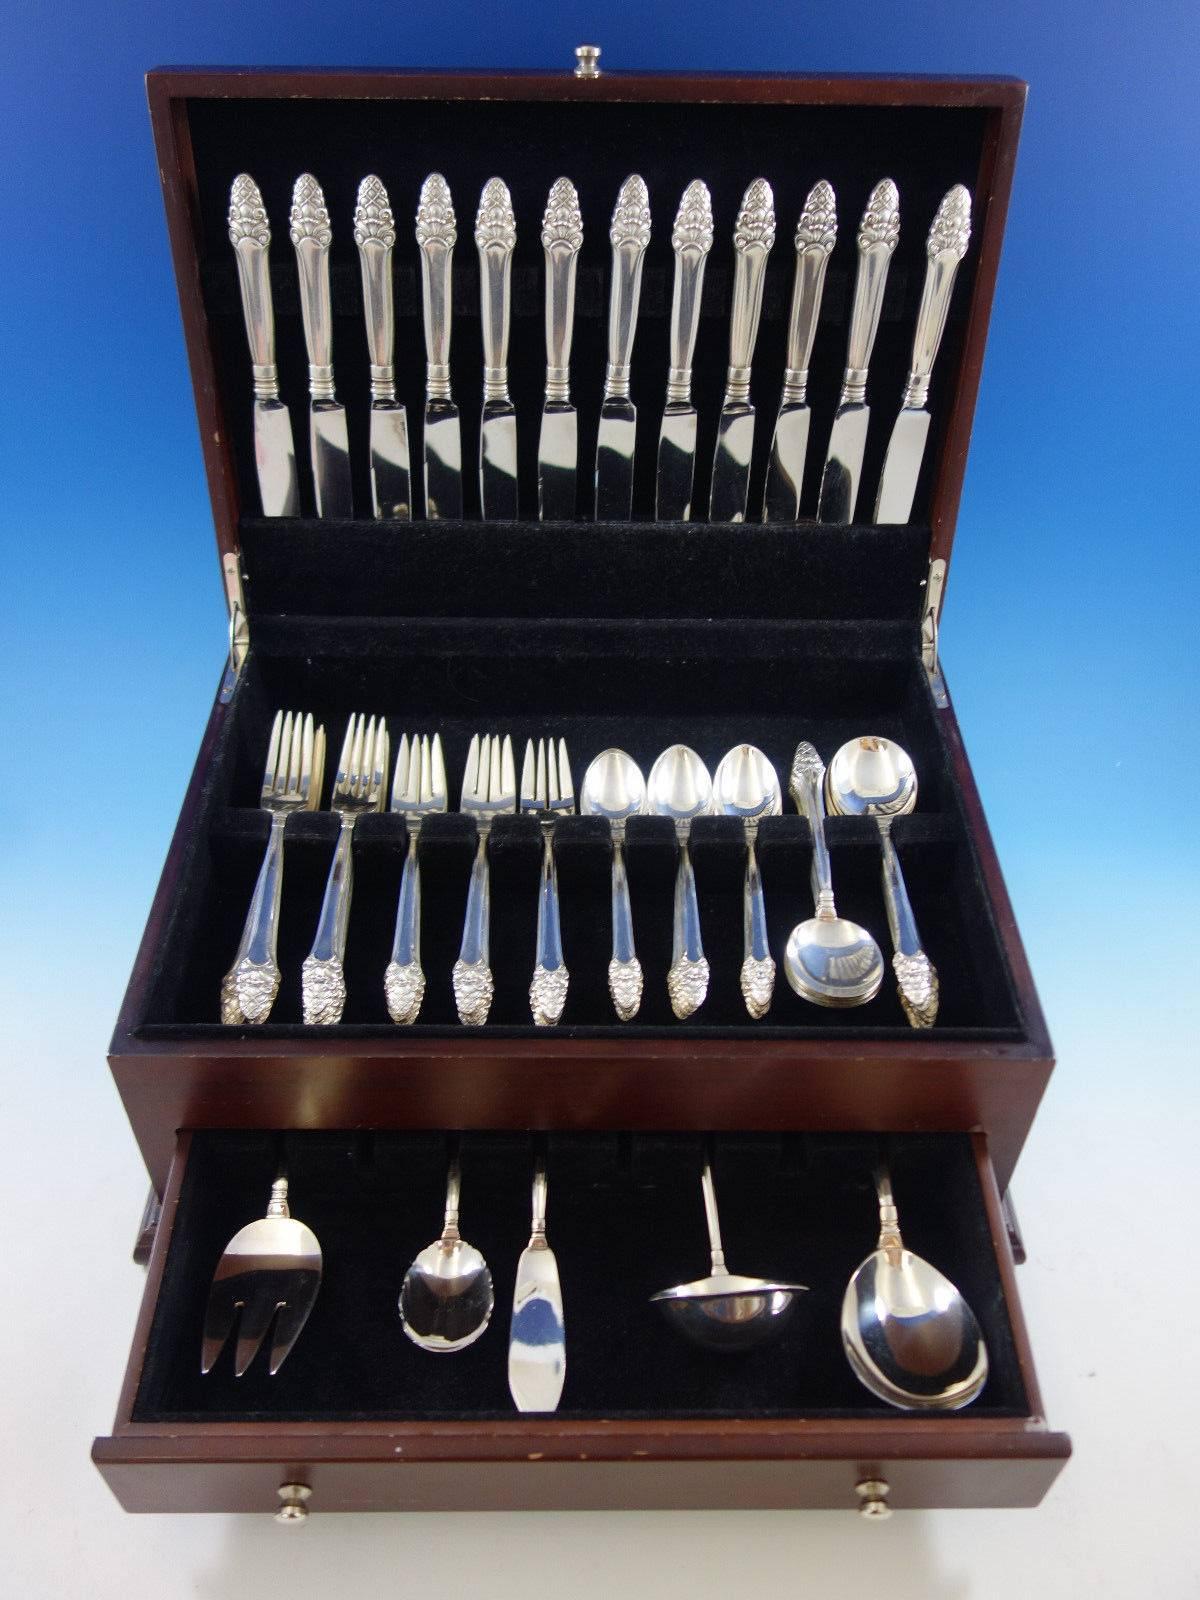 Sovereign Old by Gorham sterling silver flatware set of 65 pieces. This set includes: 

12 knives, 8 7/8